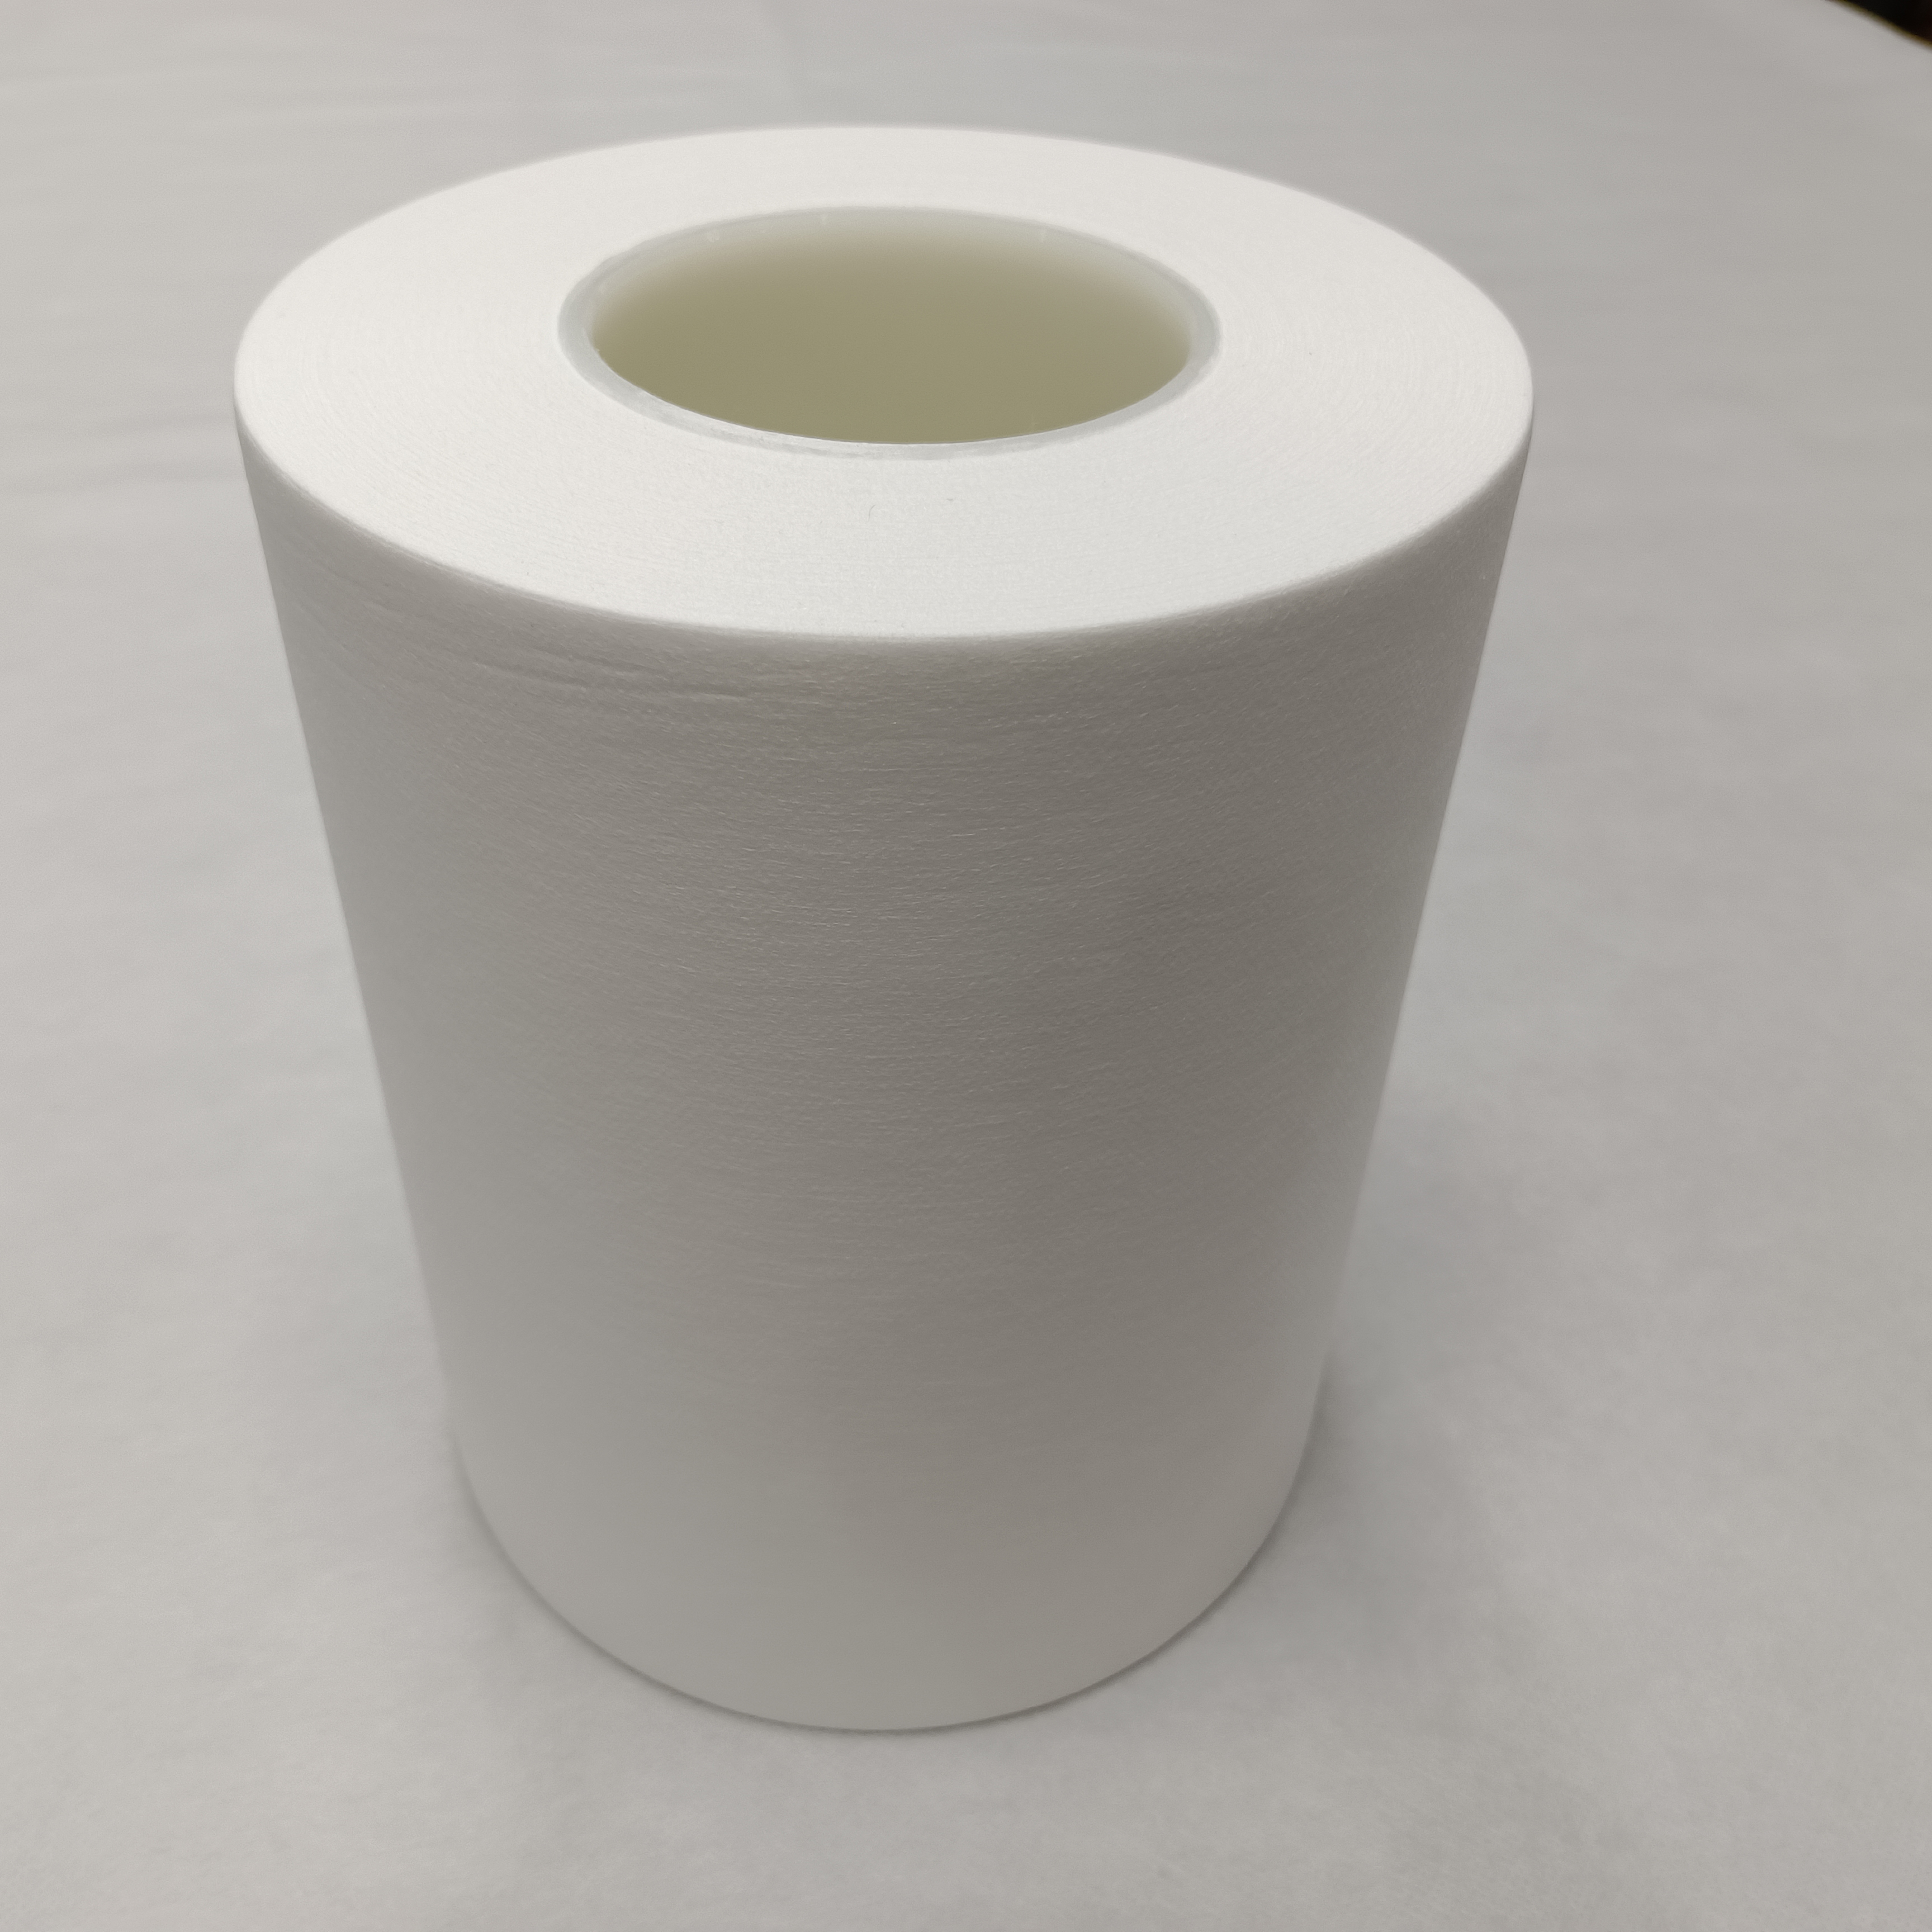 ES Nonwoven Laminated PE Film High Strength for Surface of Sanitary Napkins and diapers